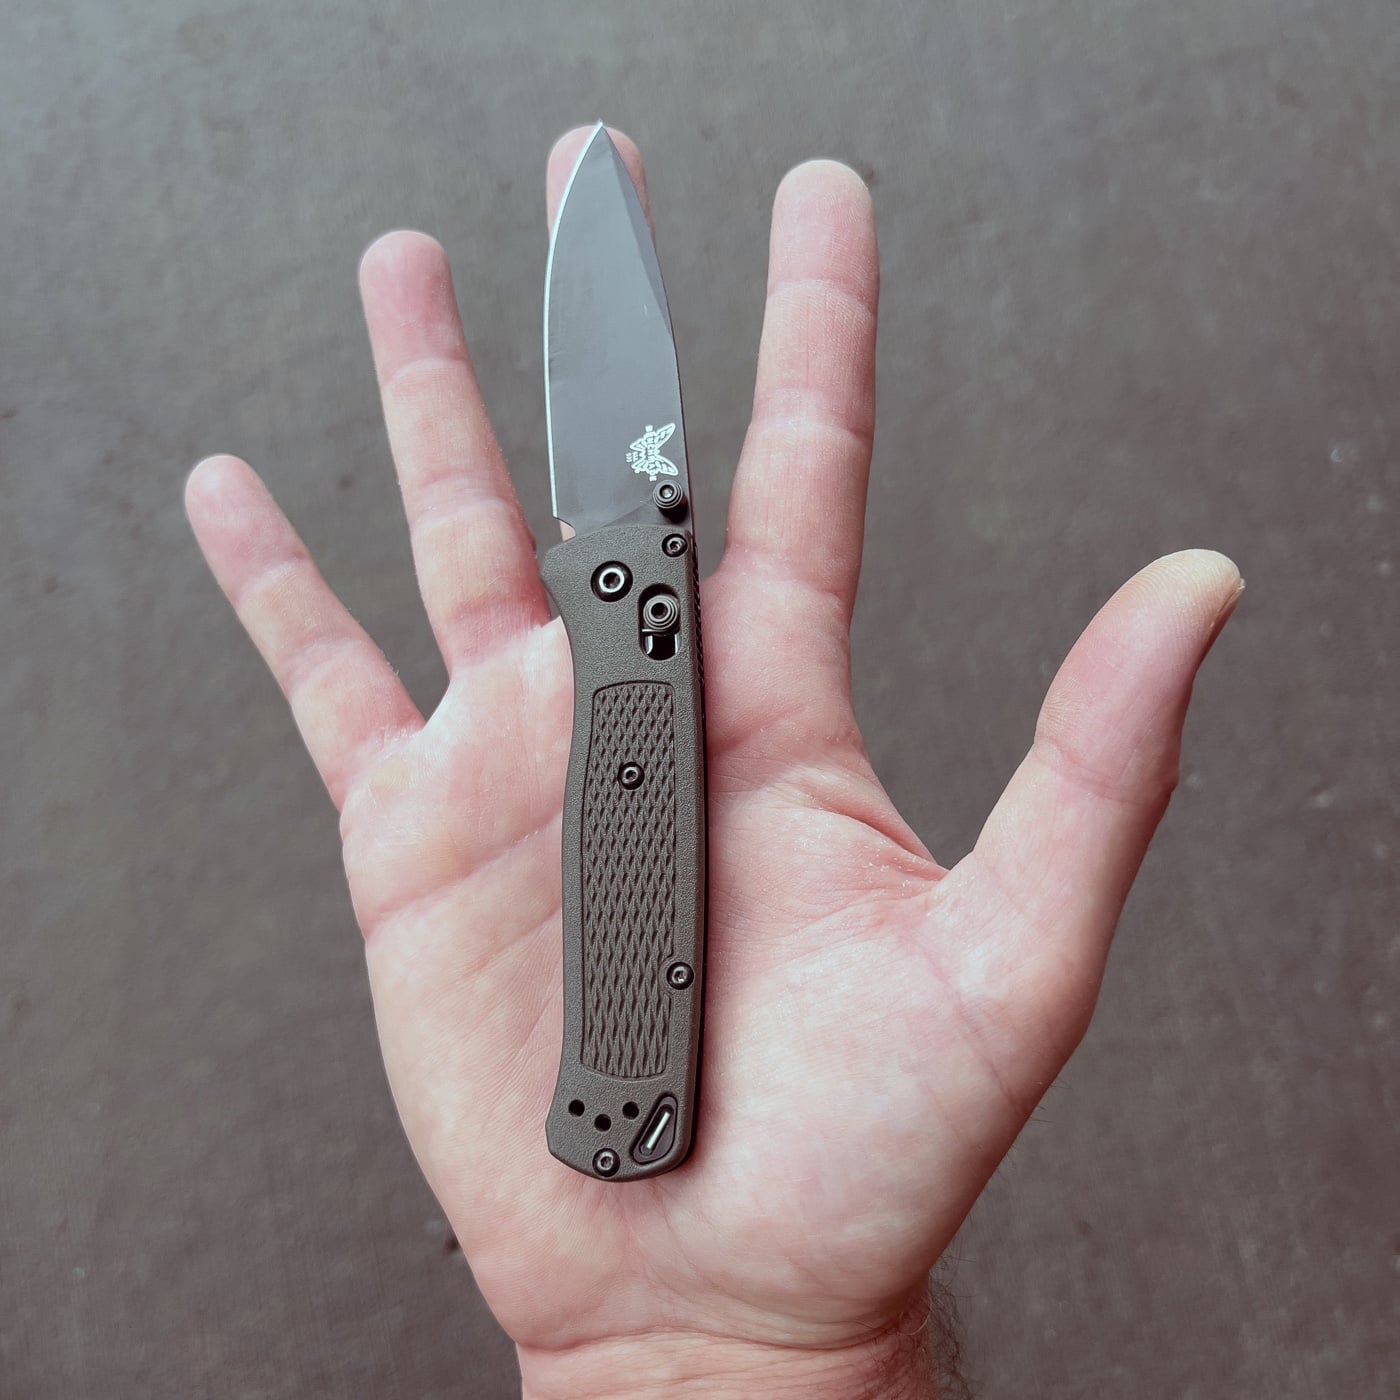 benchmade bugout size grip scales